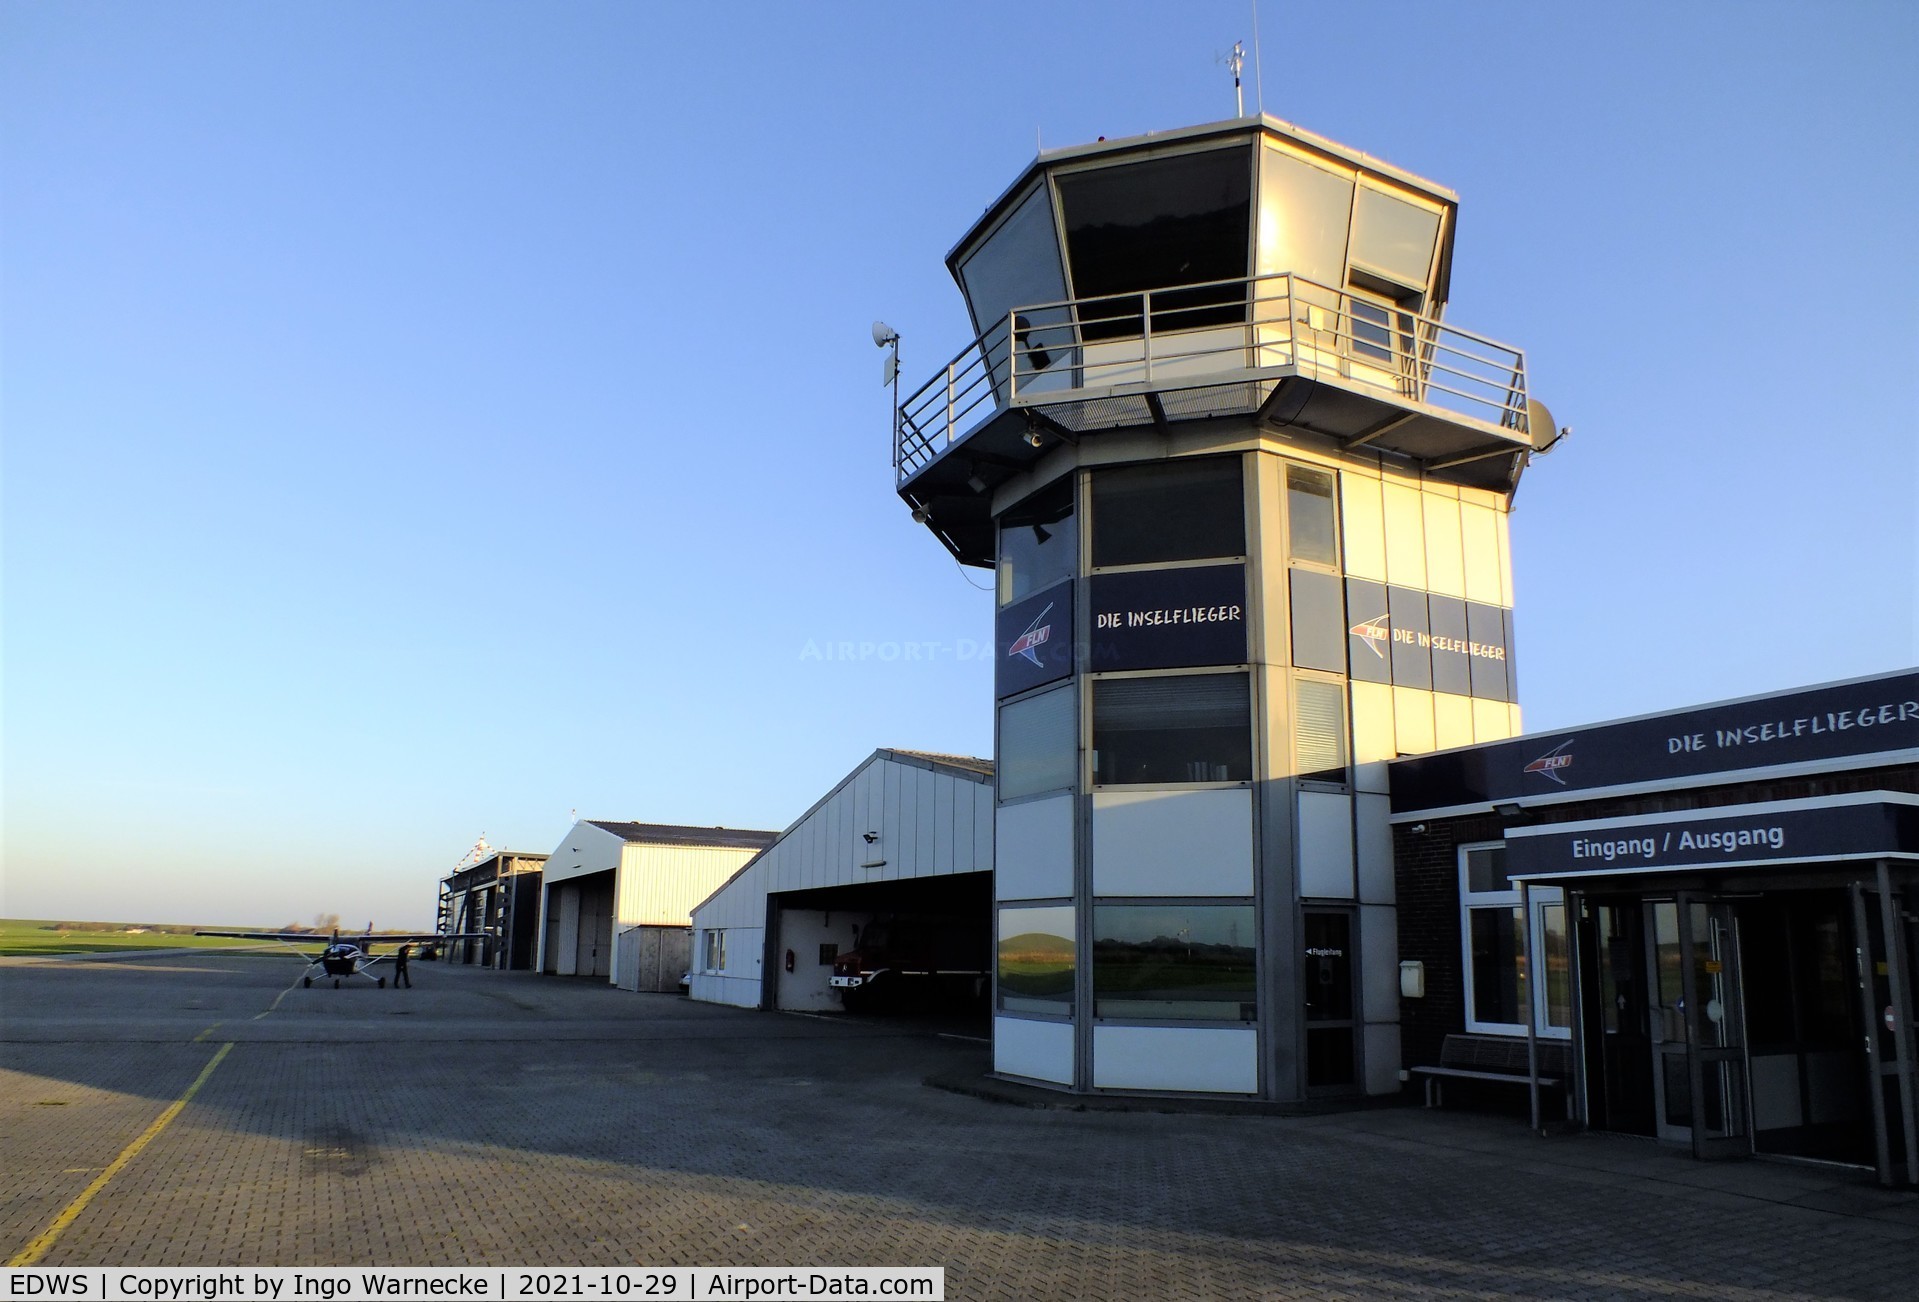 EDWS Airport - tower and hangars at Norden-Norddeich airfield